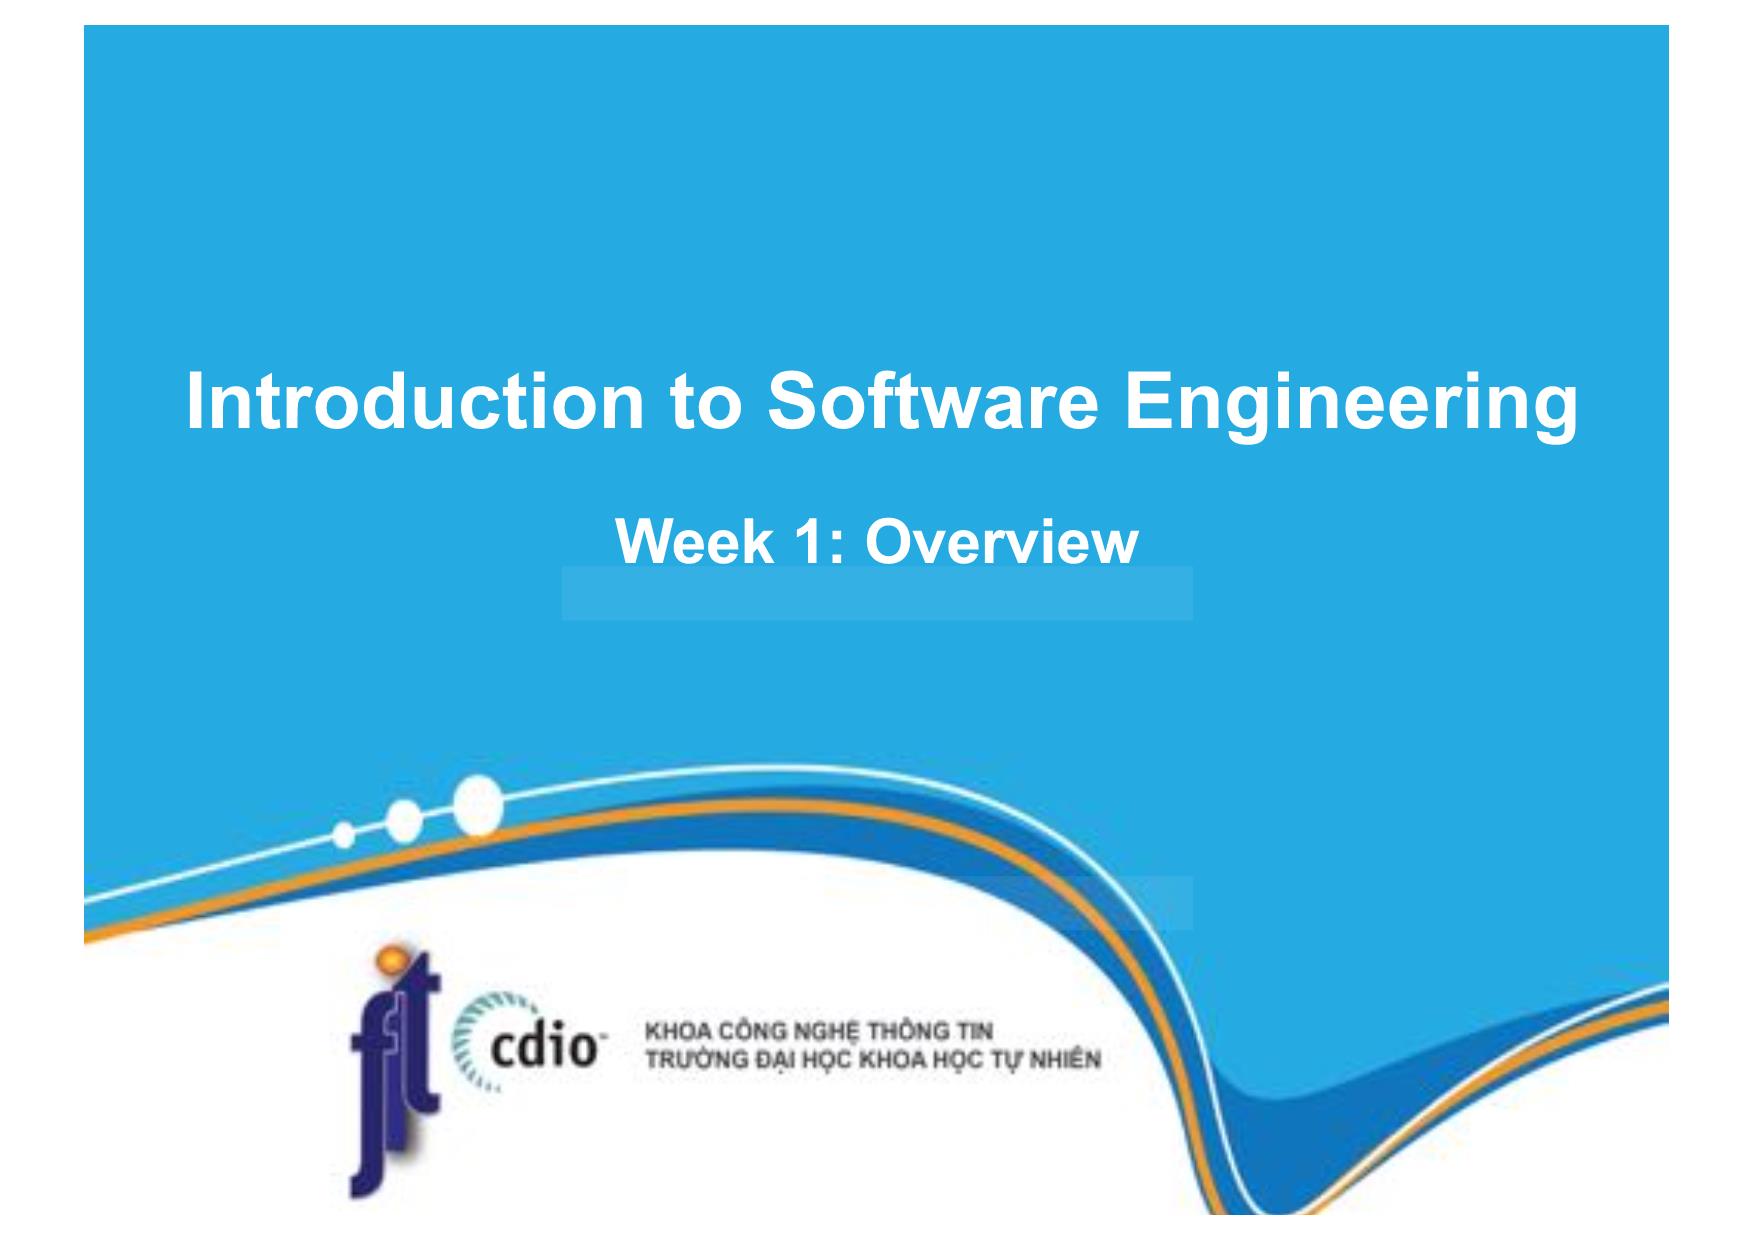 Bài giảng Introduction to Software Engineering - Week 1: Overview - Nguyễn Thị Minh Tuyền trang 1